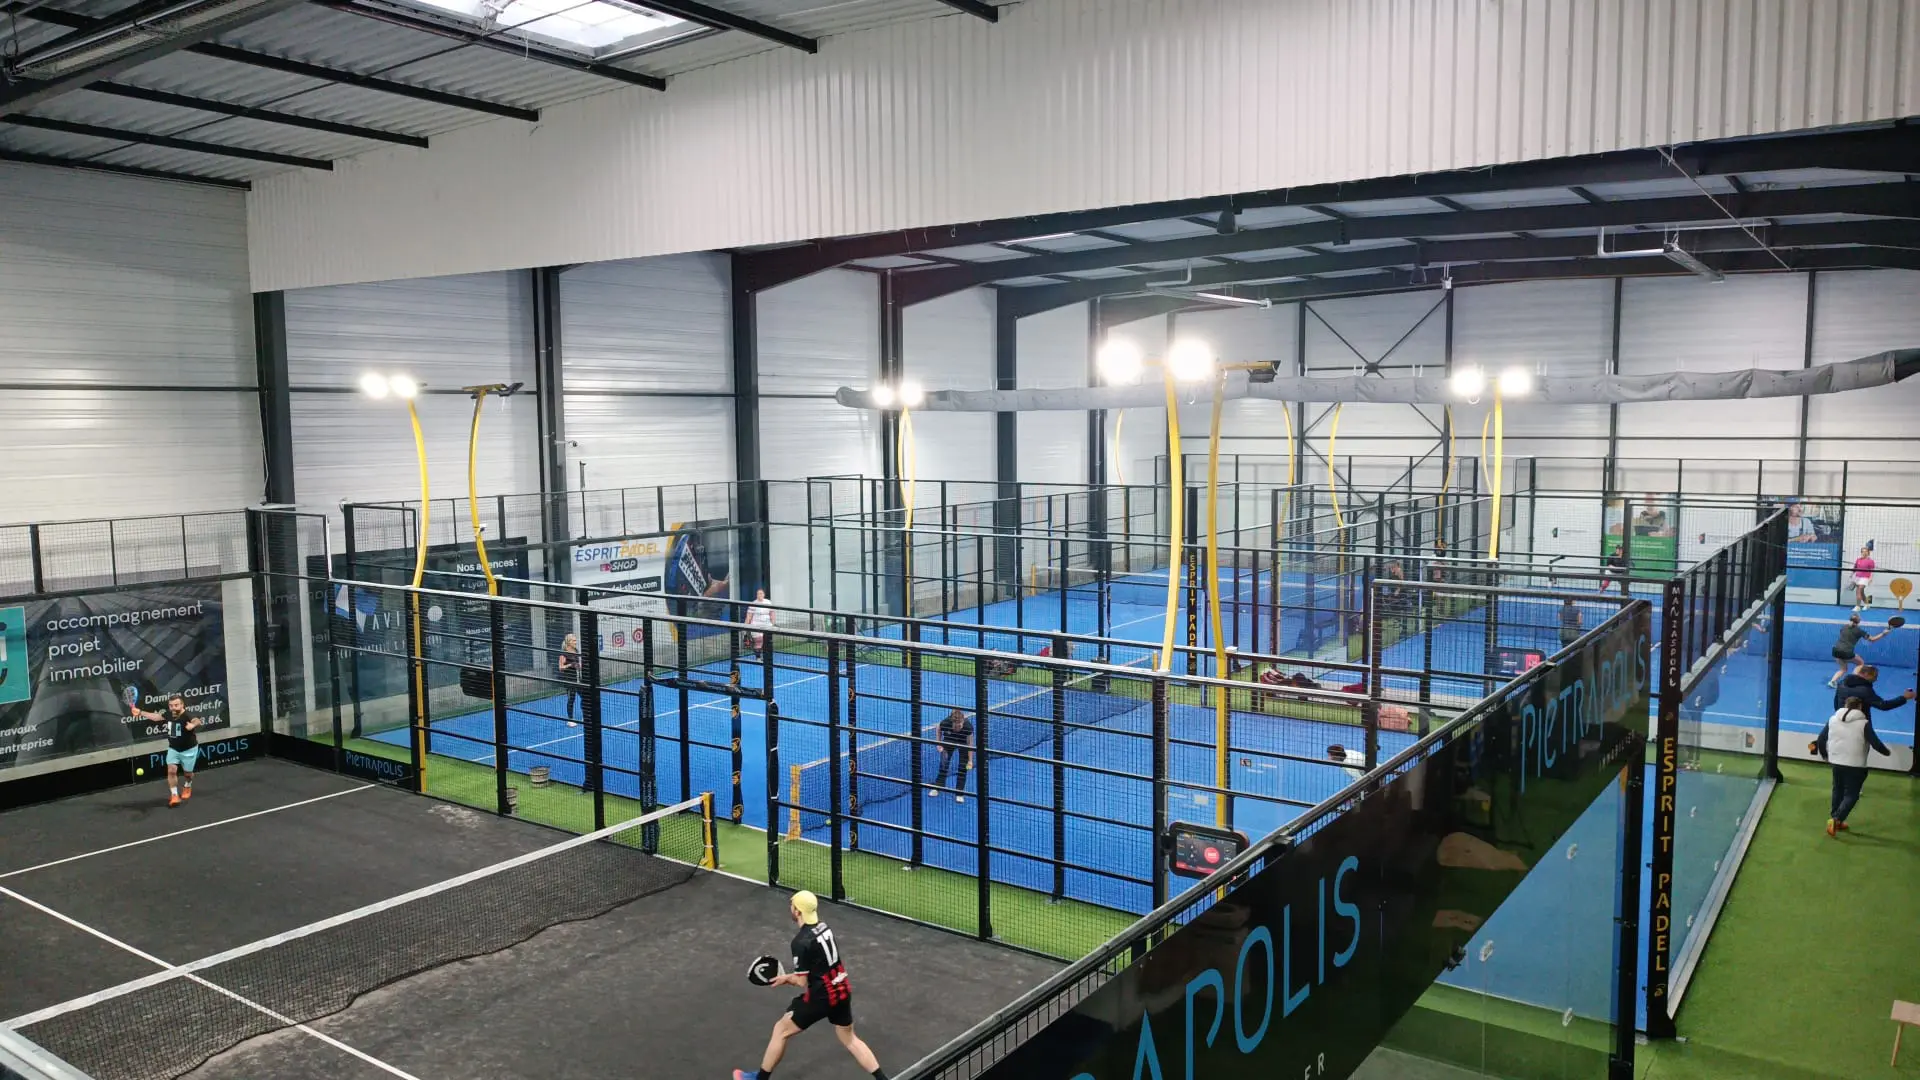 P500 Spirit Padel +45 – The competition is in full swing